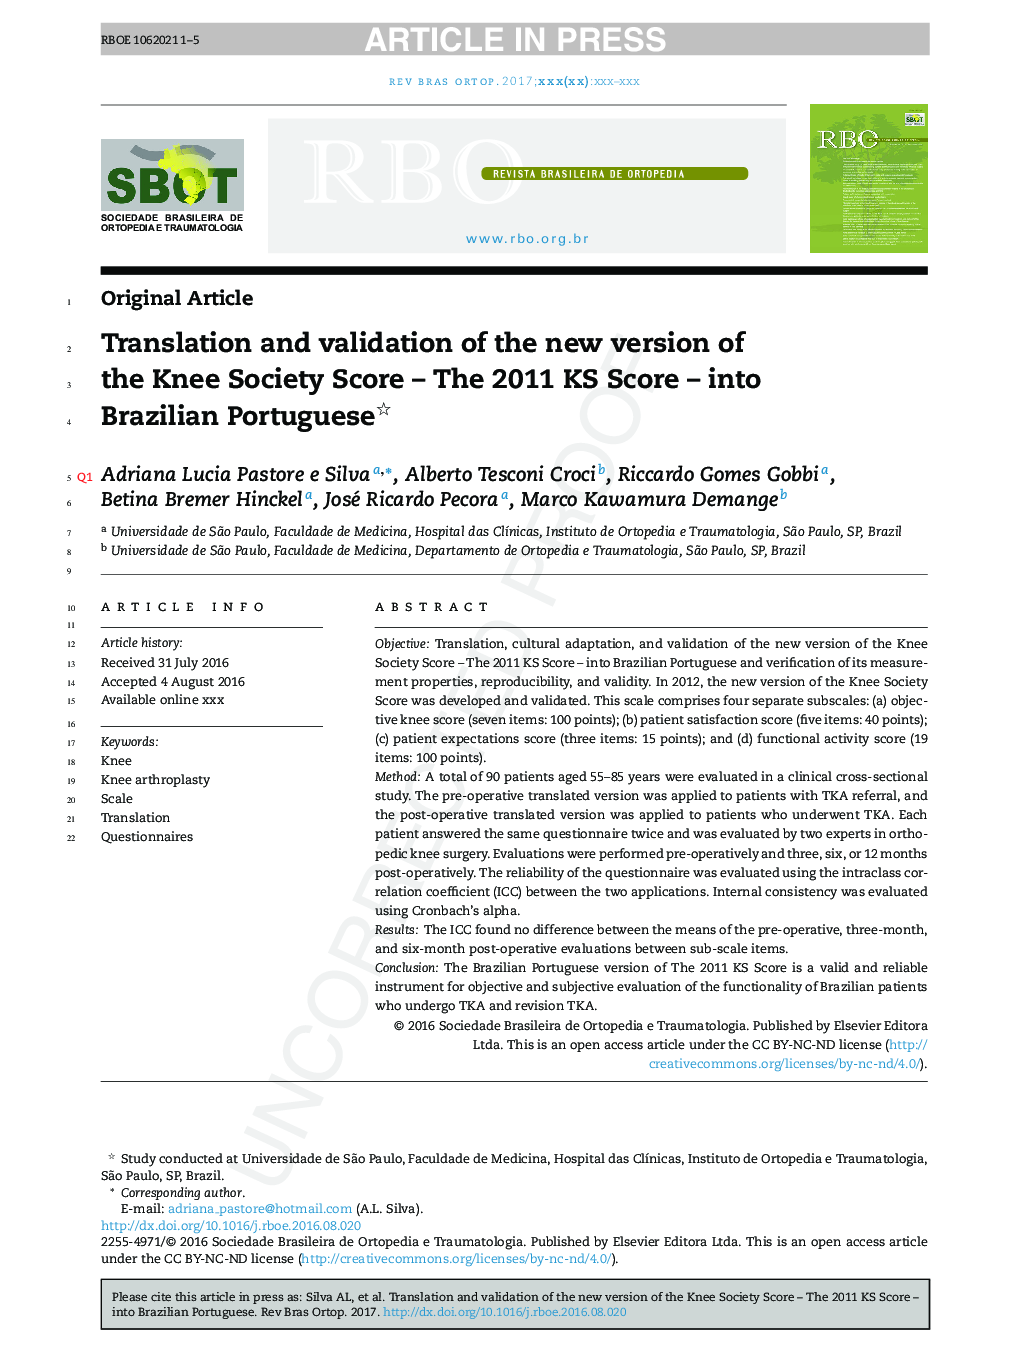 Translation and validation of the new version of the Knee Society Score - The 2011 KS Score - into Brazilian Portuguese